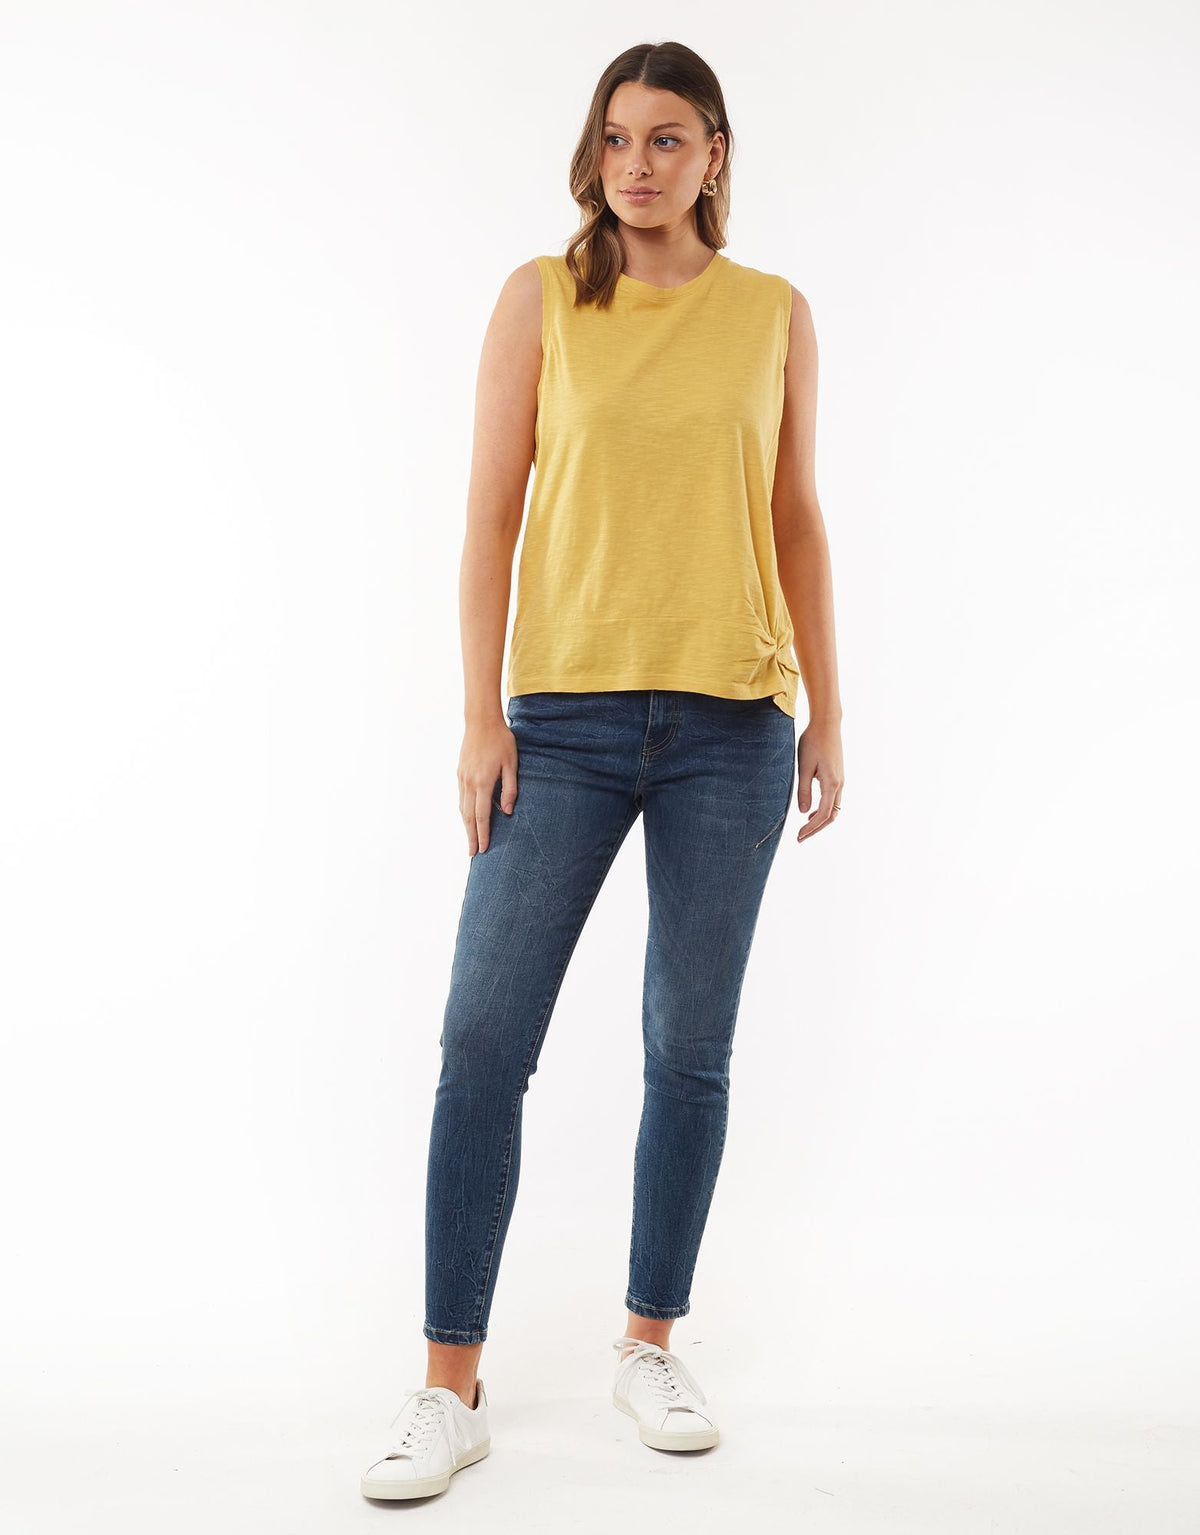 Knot Front Crop Tank - Mustard - Foxwood - FUDGE Gifts Home Lifestyle